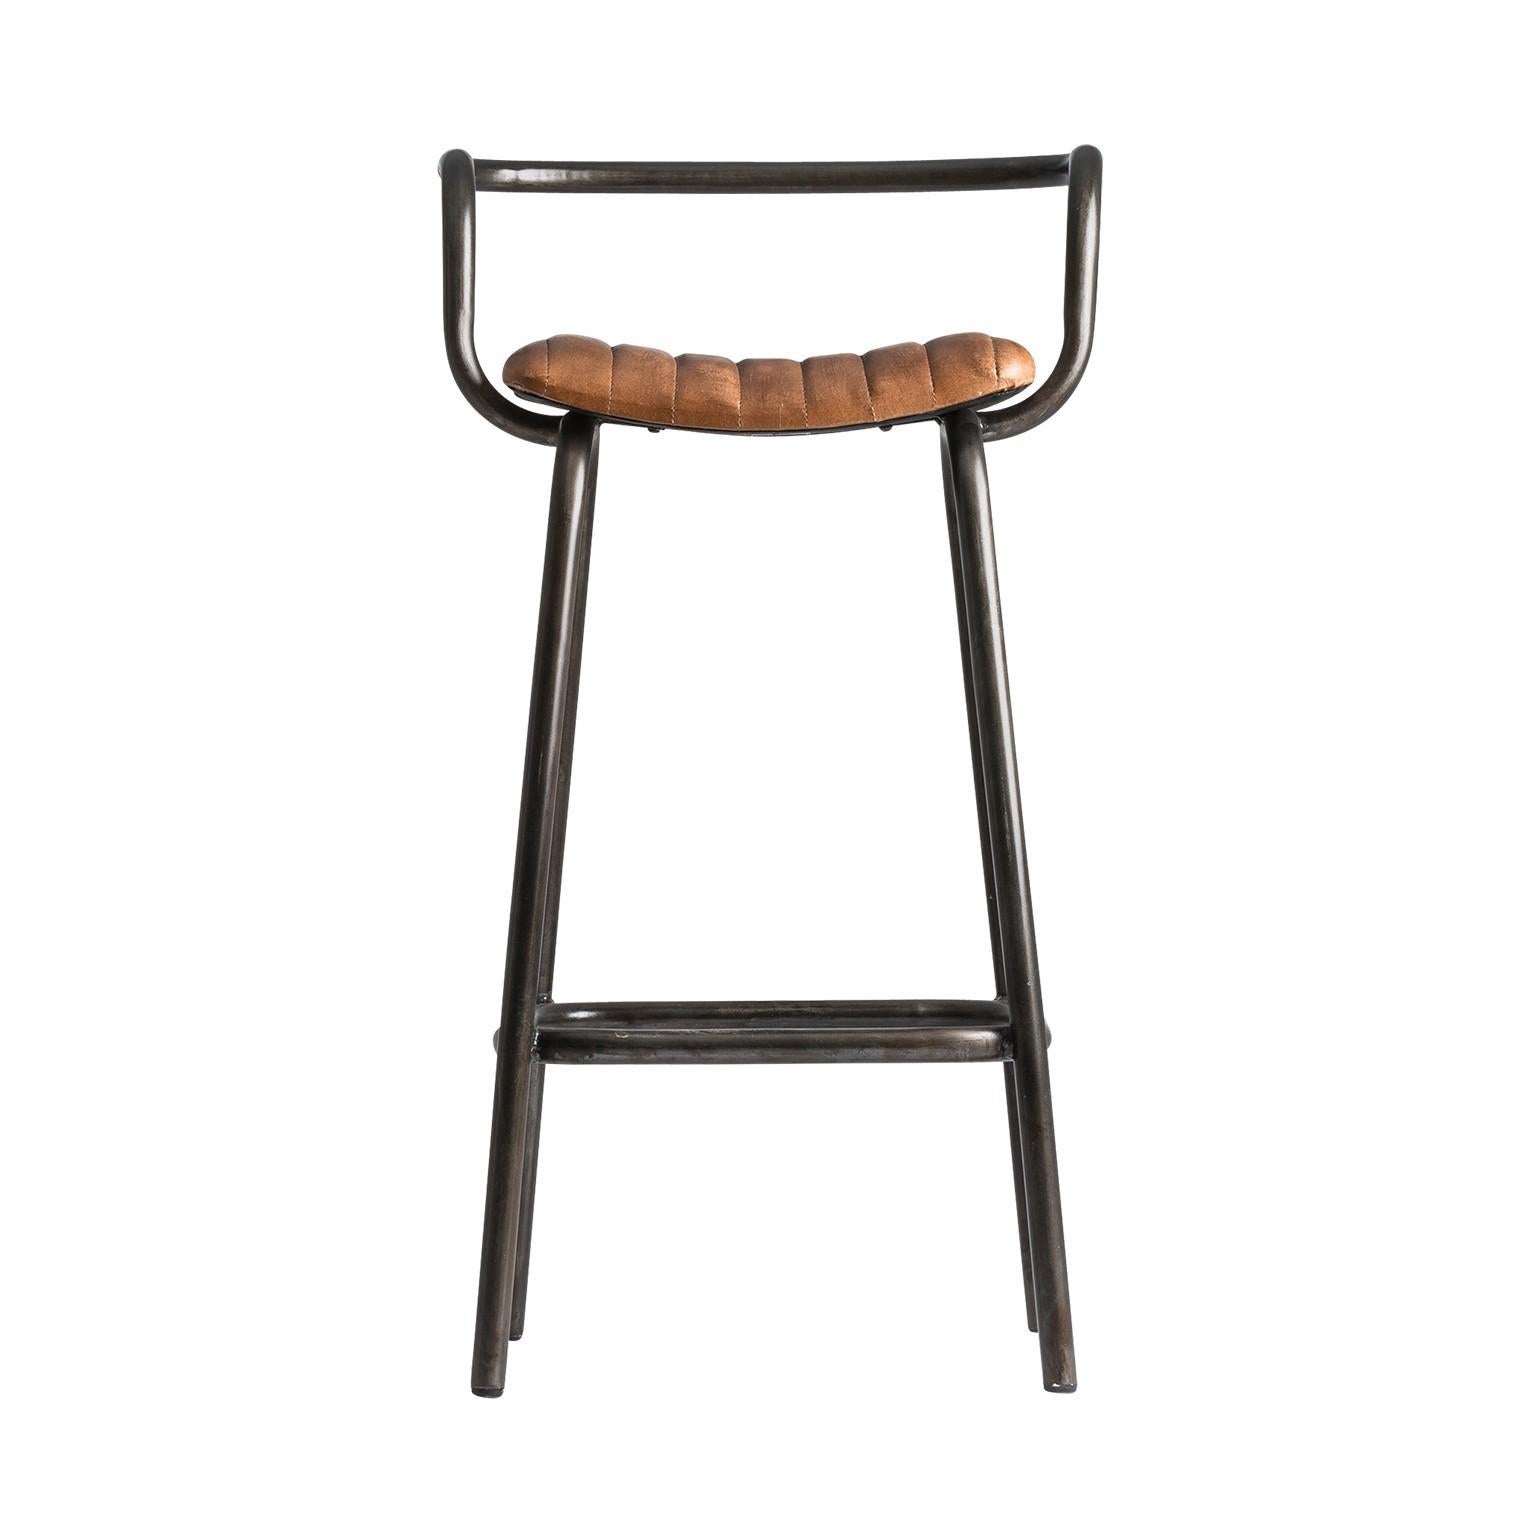 Elegant bar stool with metal structure and leather seat, combining quality, robustness and class. Comfortable and ergonomic, aerial and design. In excellent condition (new items, never used).